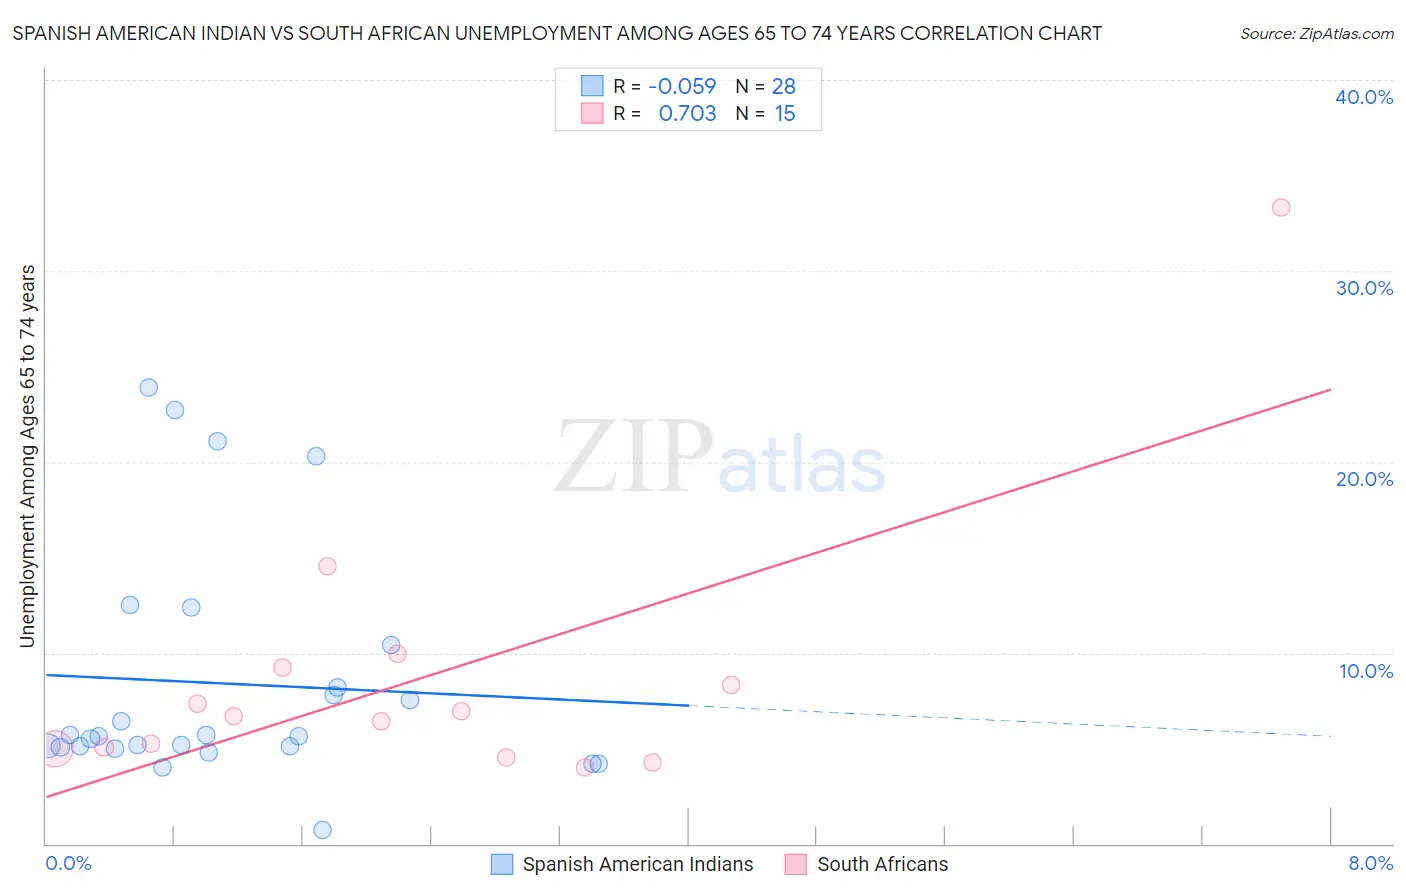 Spanish American Indian vs South African Unemployment Among Ages 65 to 74 years